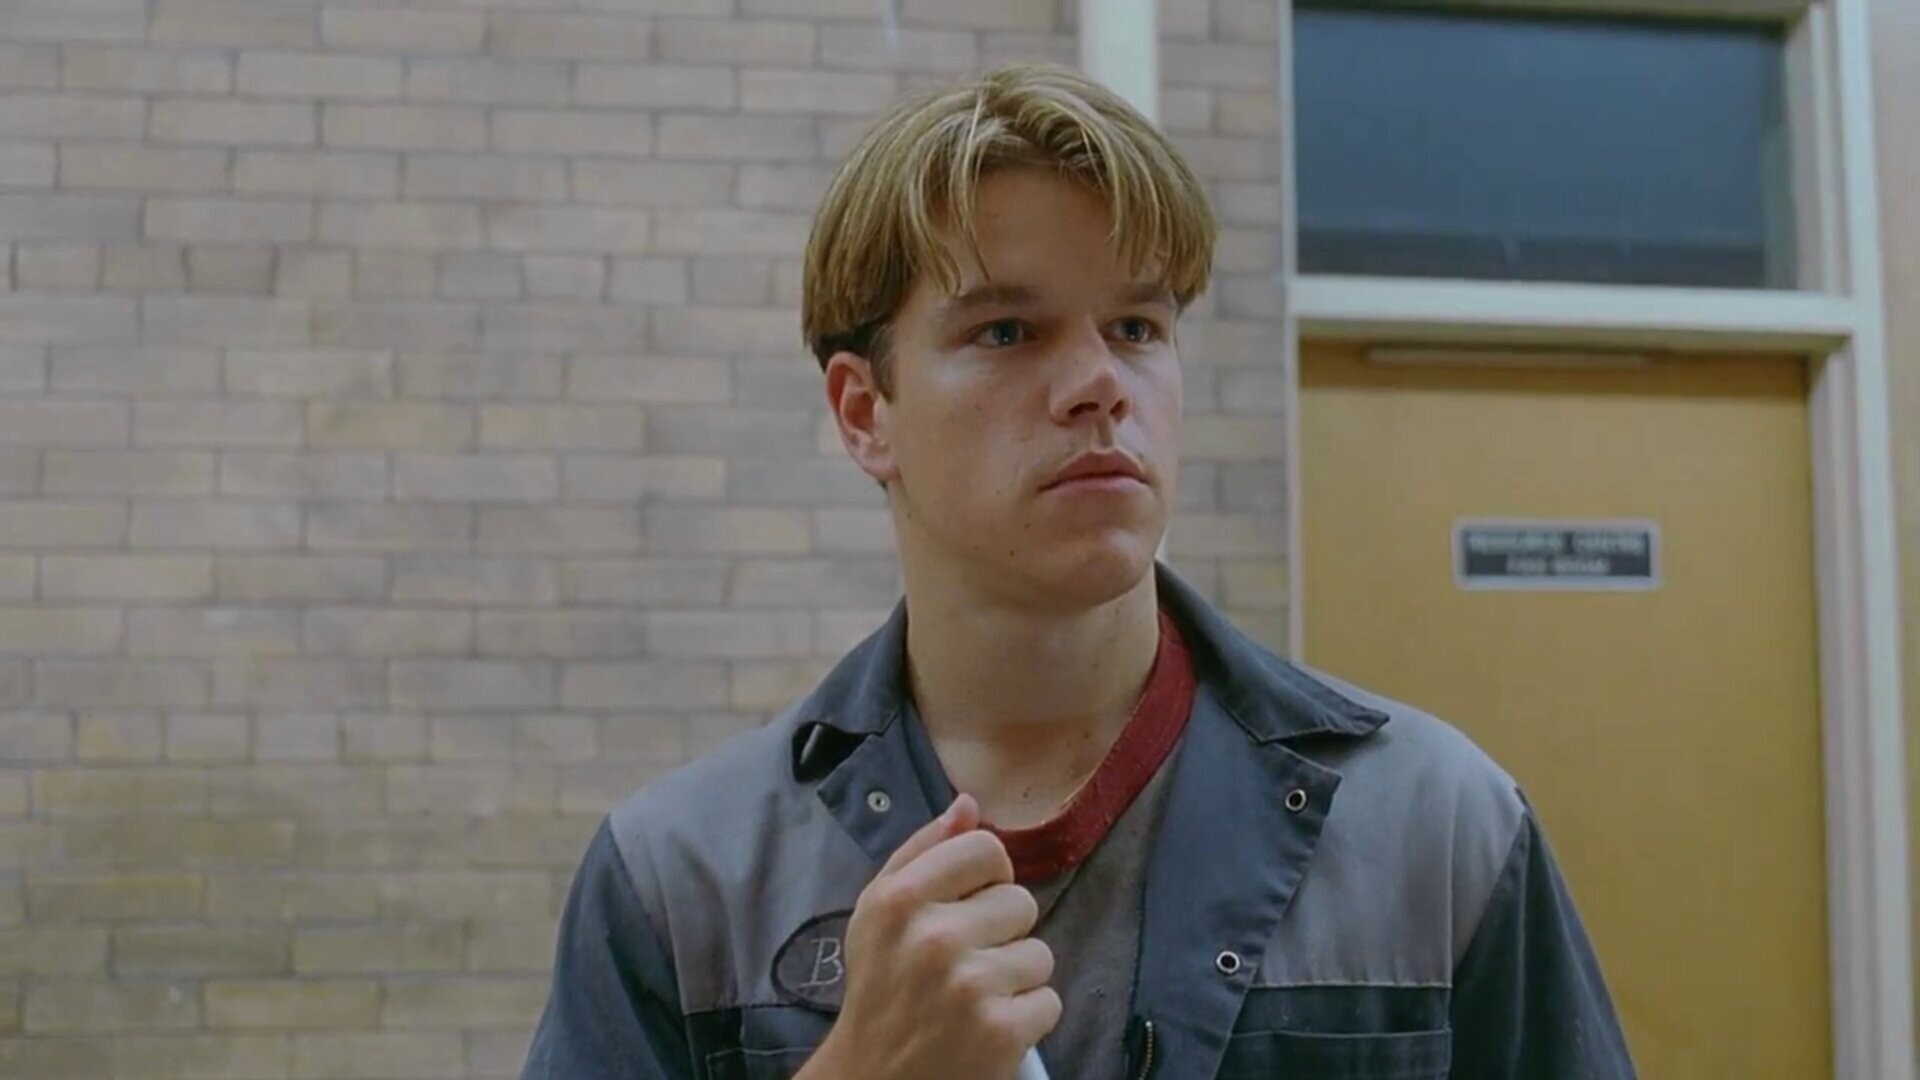 Good Will Hunting: Ben Affleck and Matt Damon wrote the script for the movie together. 1920x1080 Full HD Wallpaper.